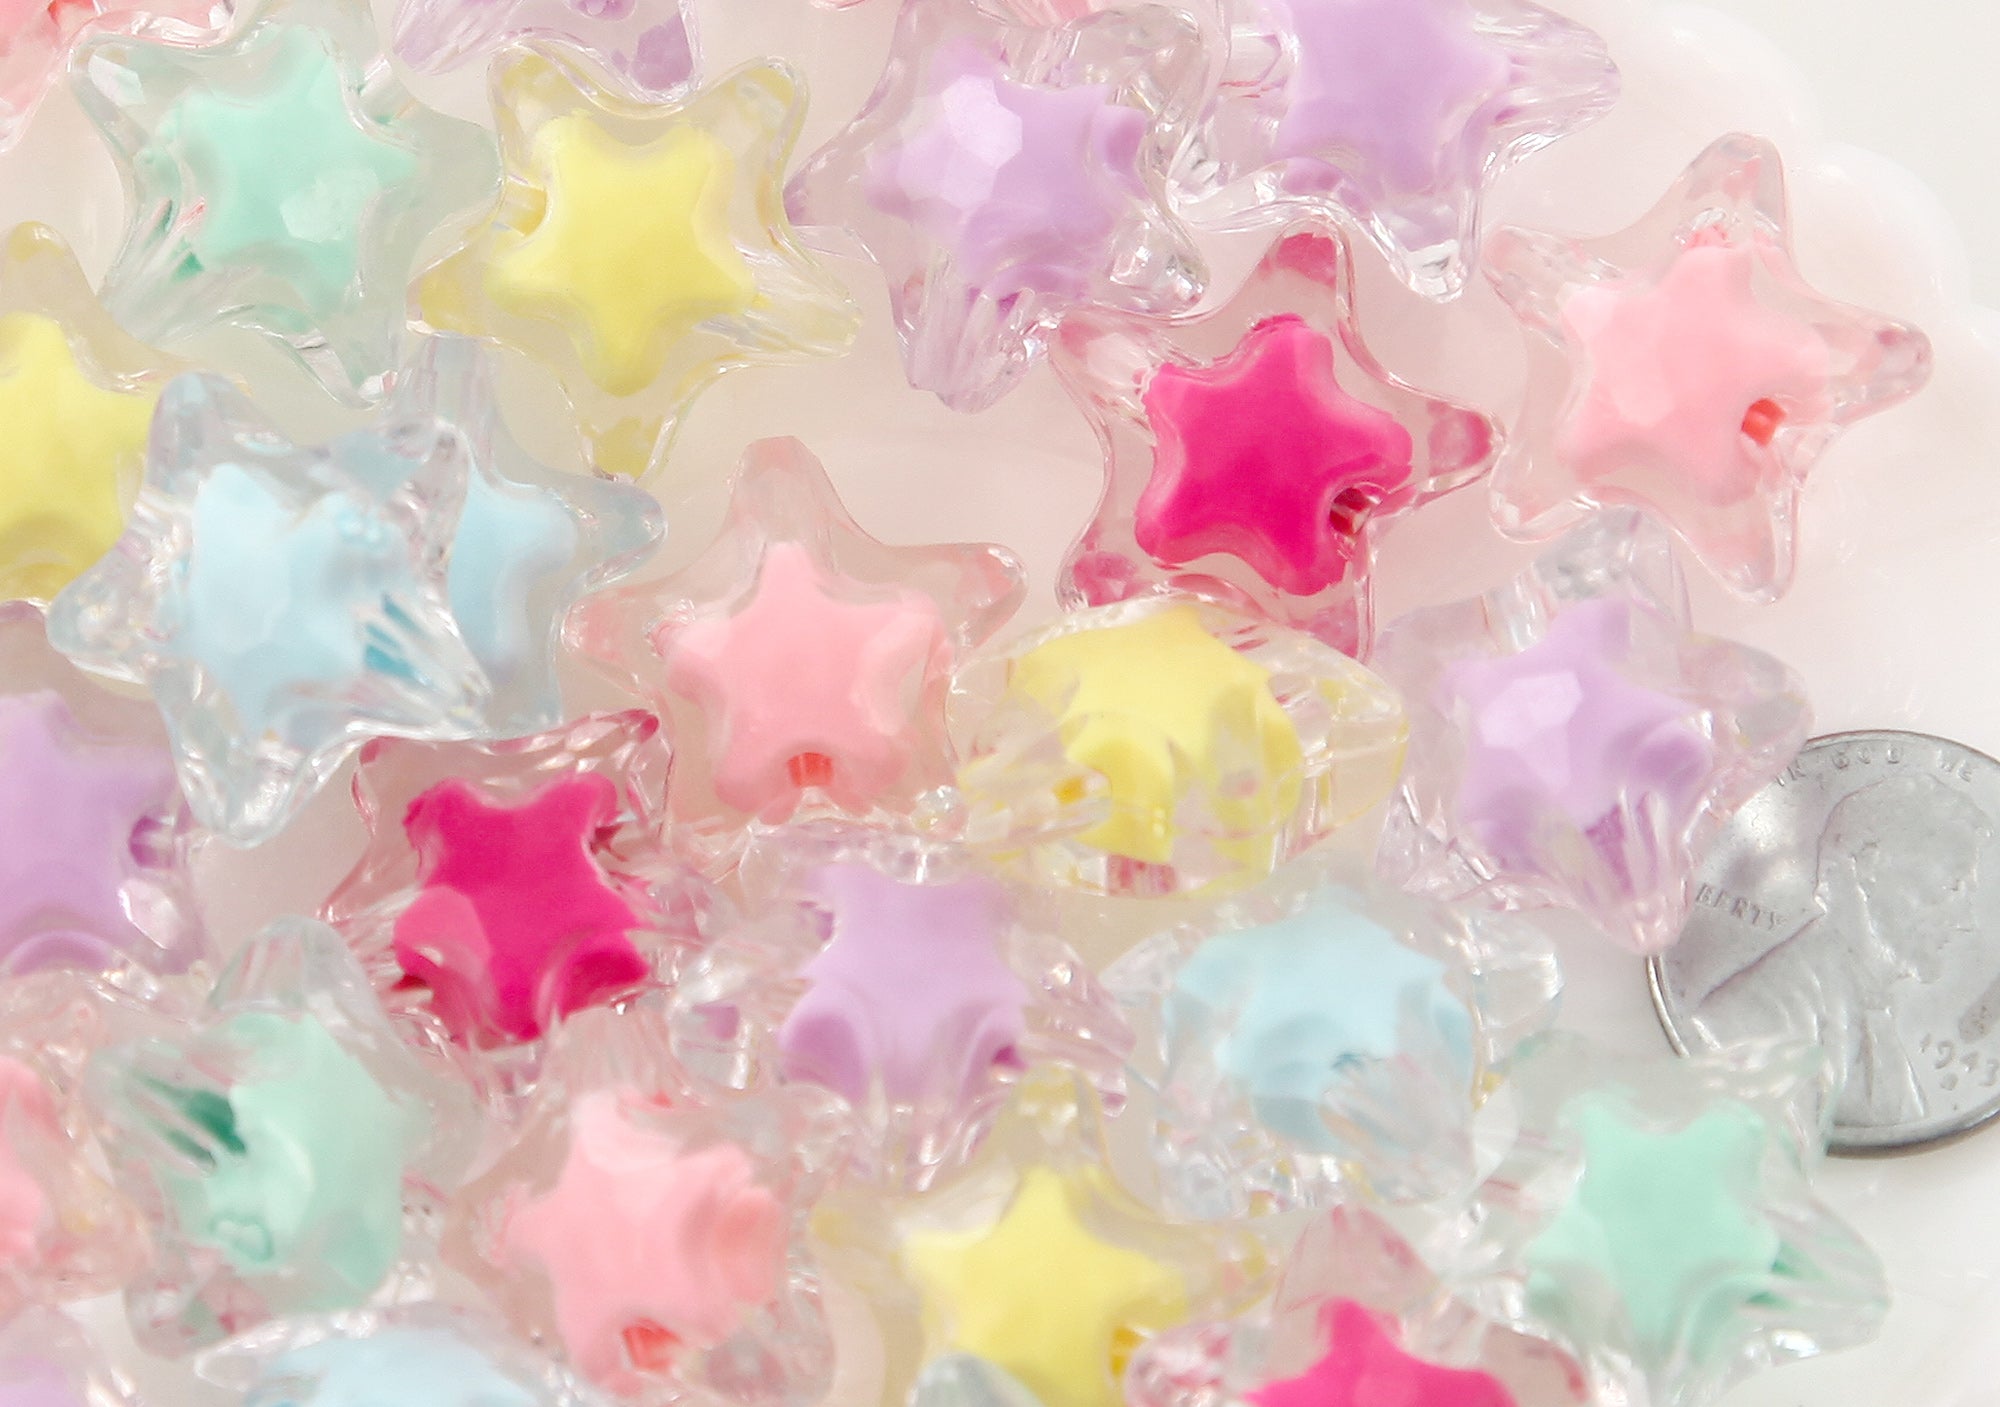 Pastel Star Beads - 15mm Super Cute Pastel Inner Bead Star Resin or Acrylic  Beads - 50 pc set